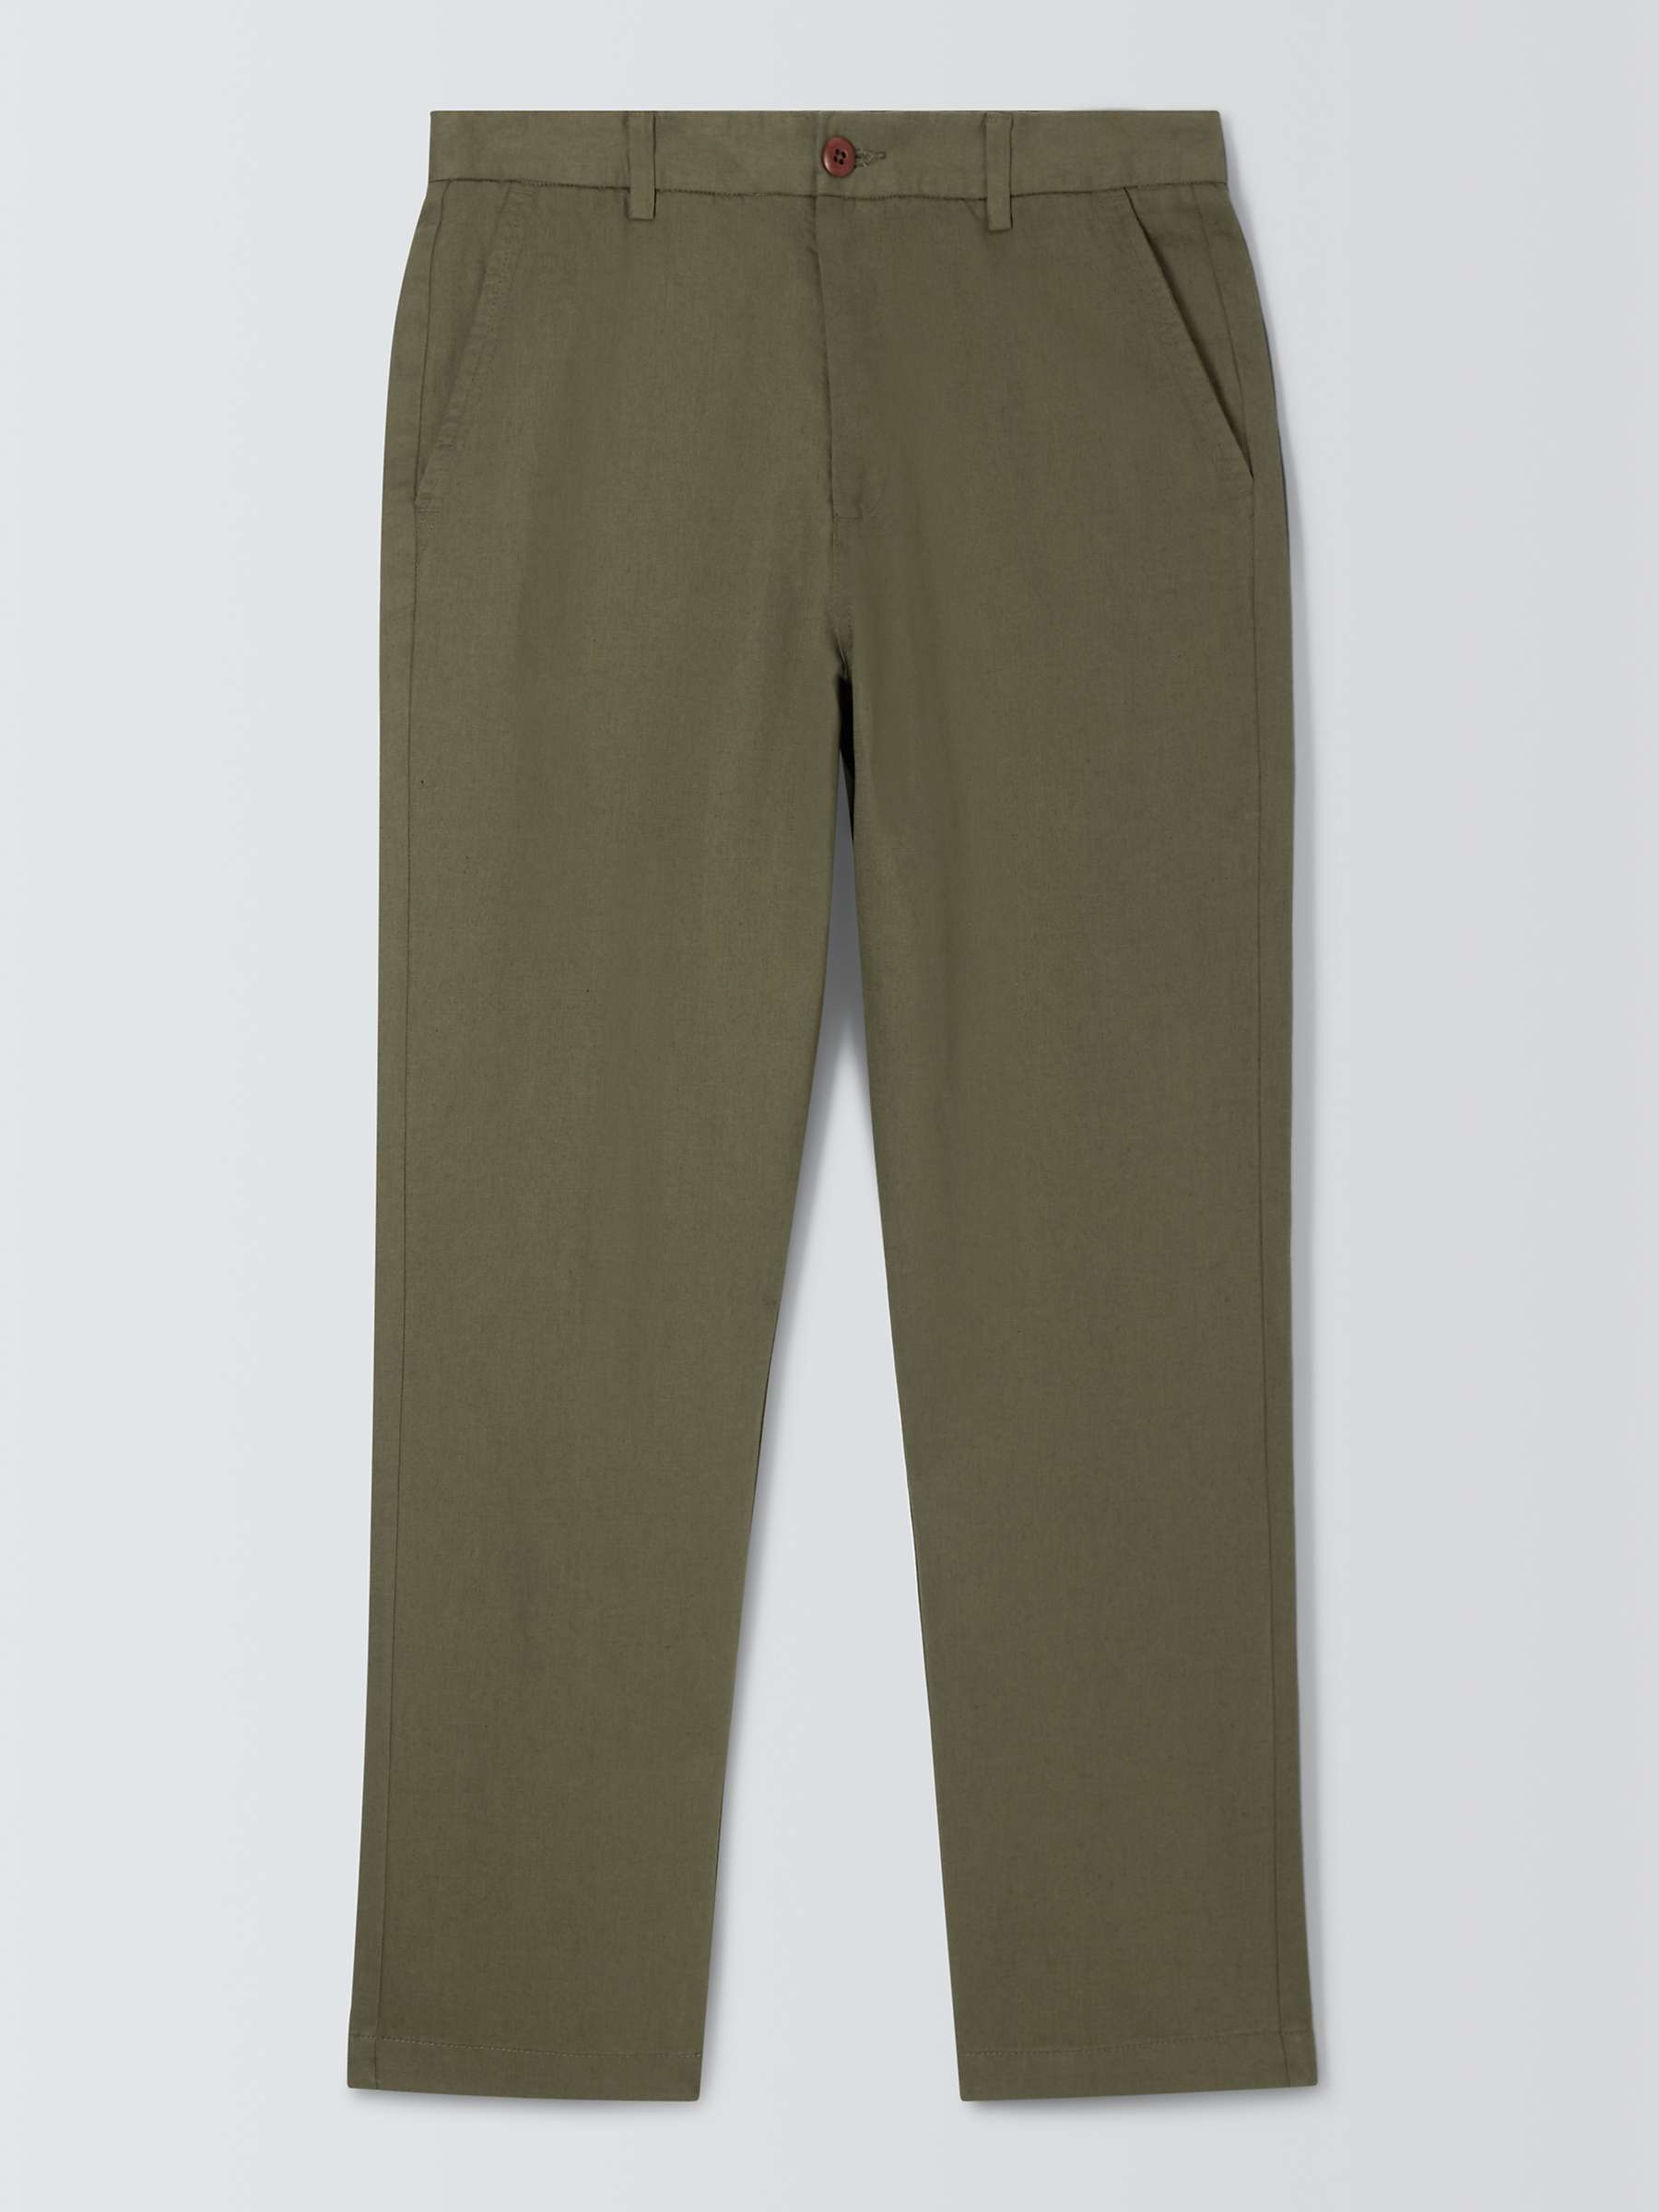 Buy John Lewis Straight Fit Cotton Linen Chinos Online at johnlewis.com